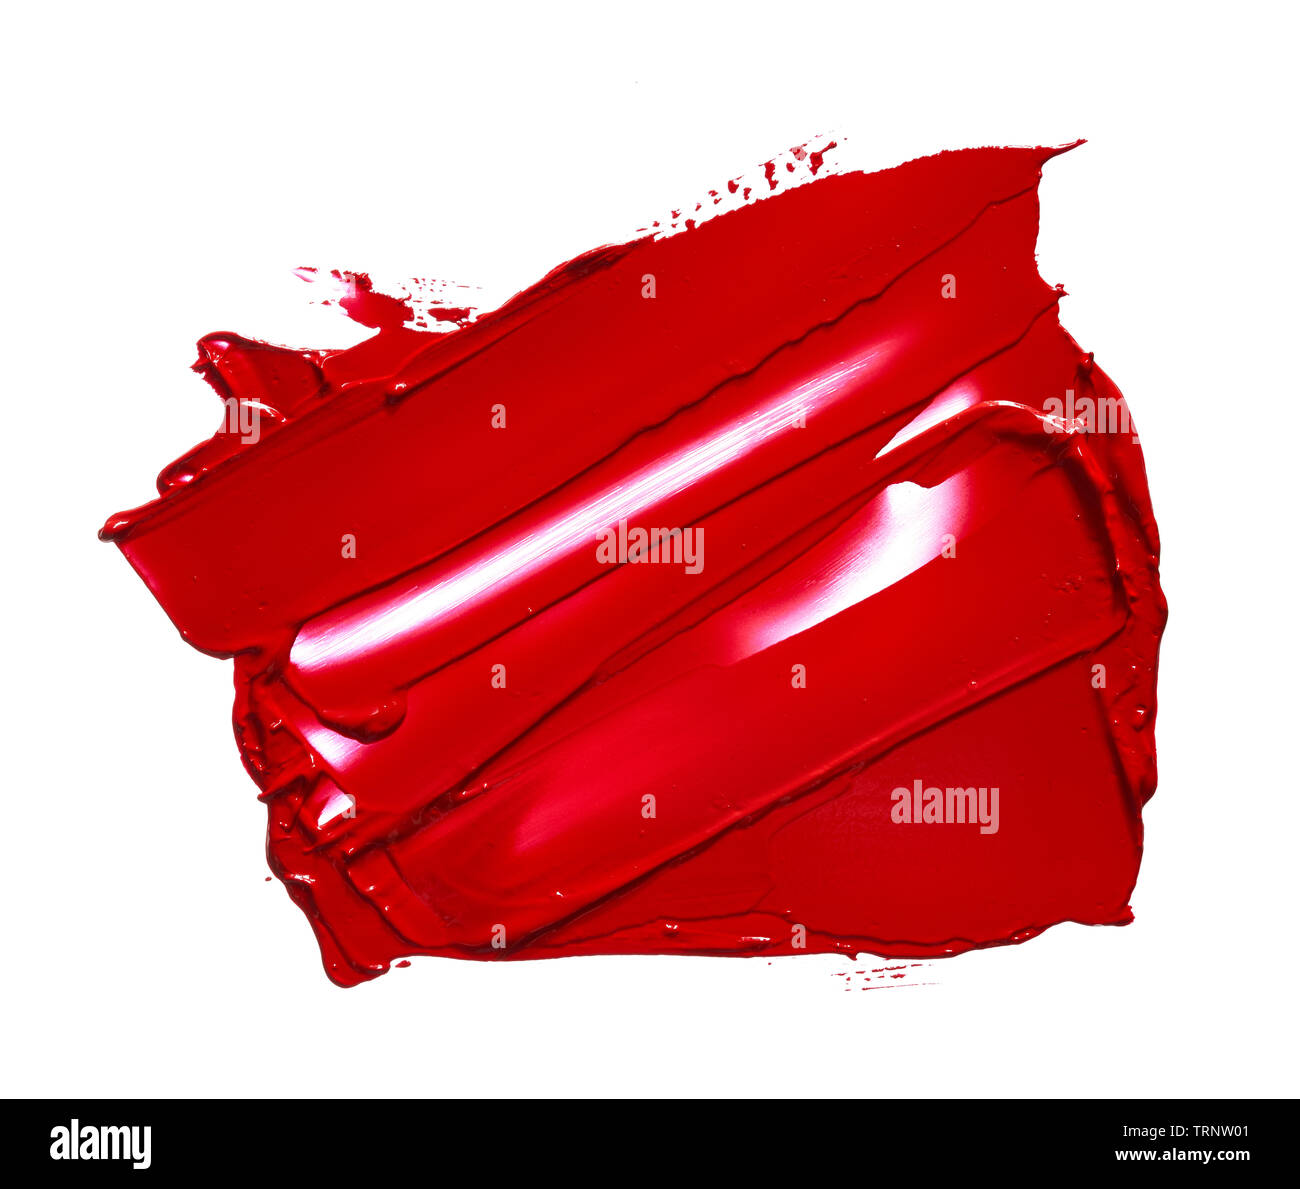 Smear and texture of red lipstick or acrylic paint isolated on white background. Stock Photo